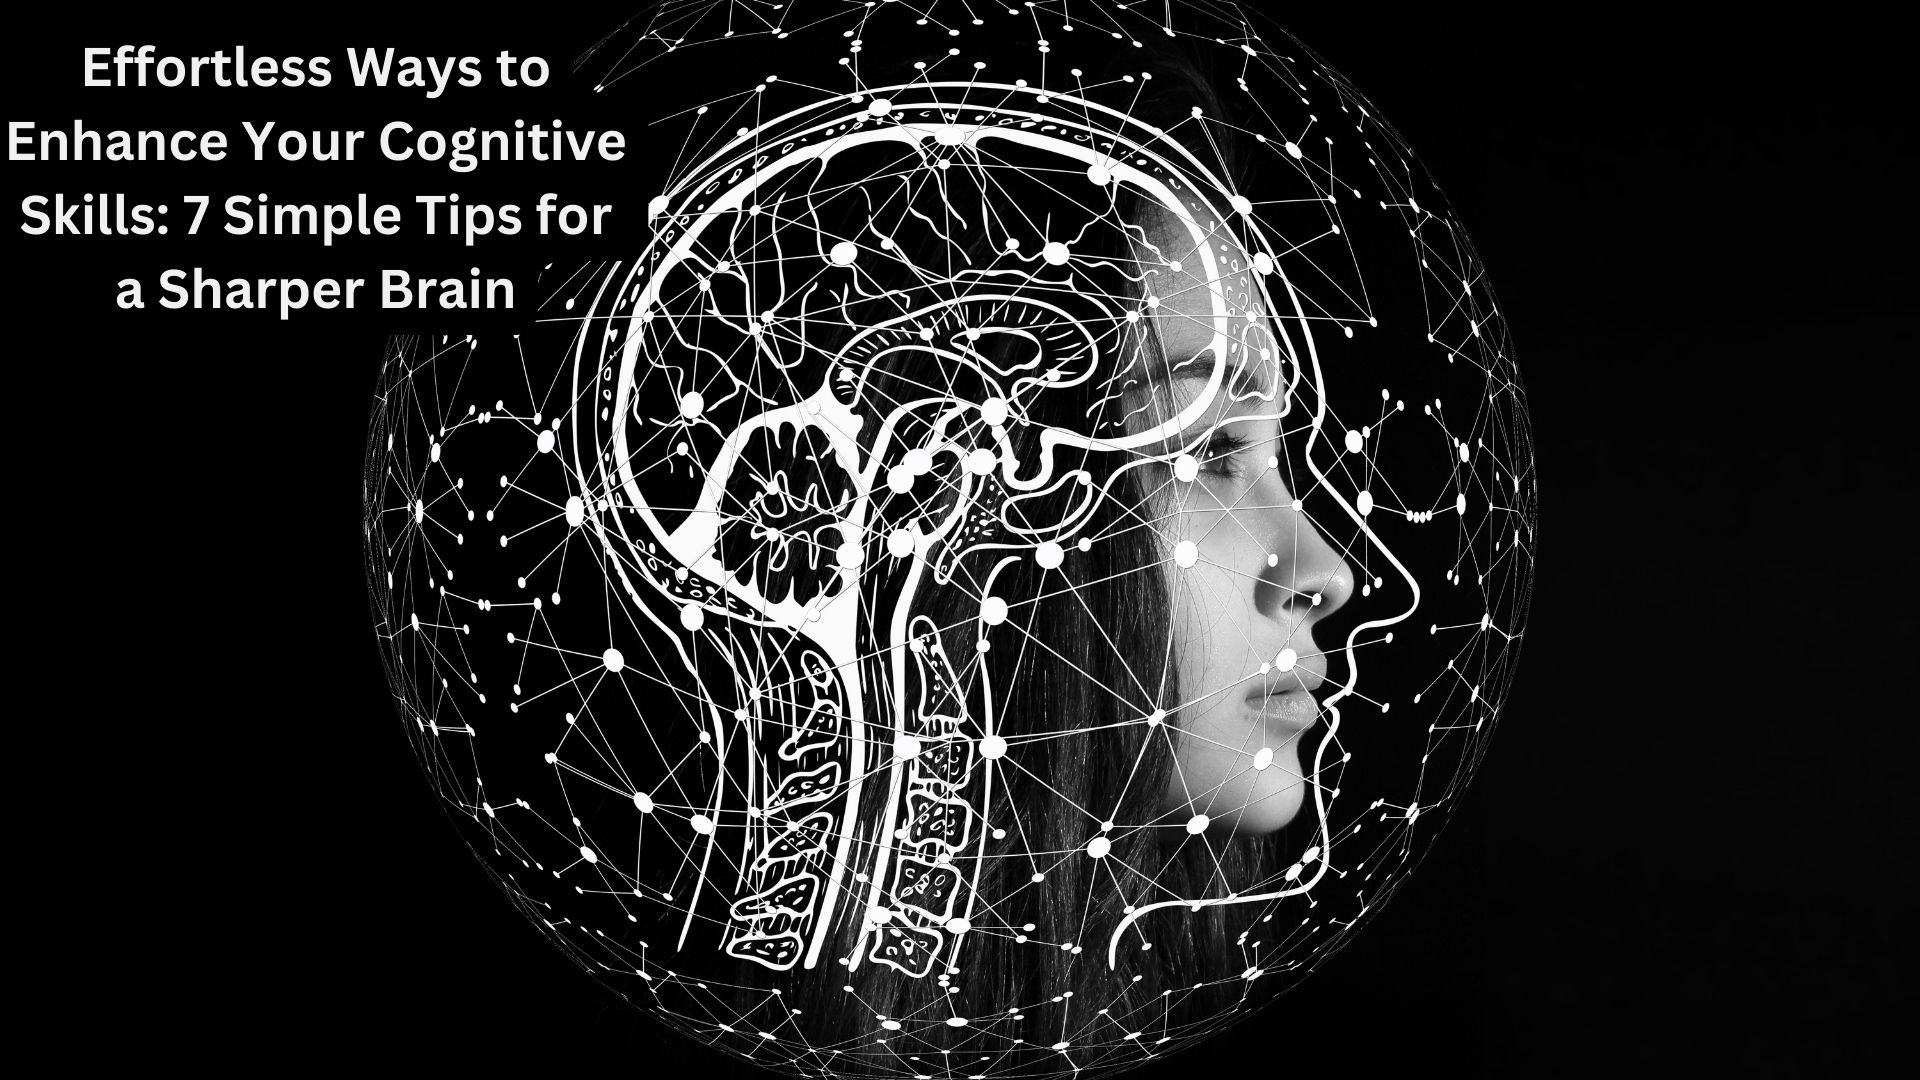 Effortless Ways to Enhance Your Cognitive Skills: 7 Simple Tips for a Sharper Brain